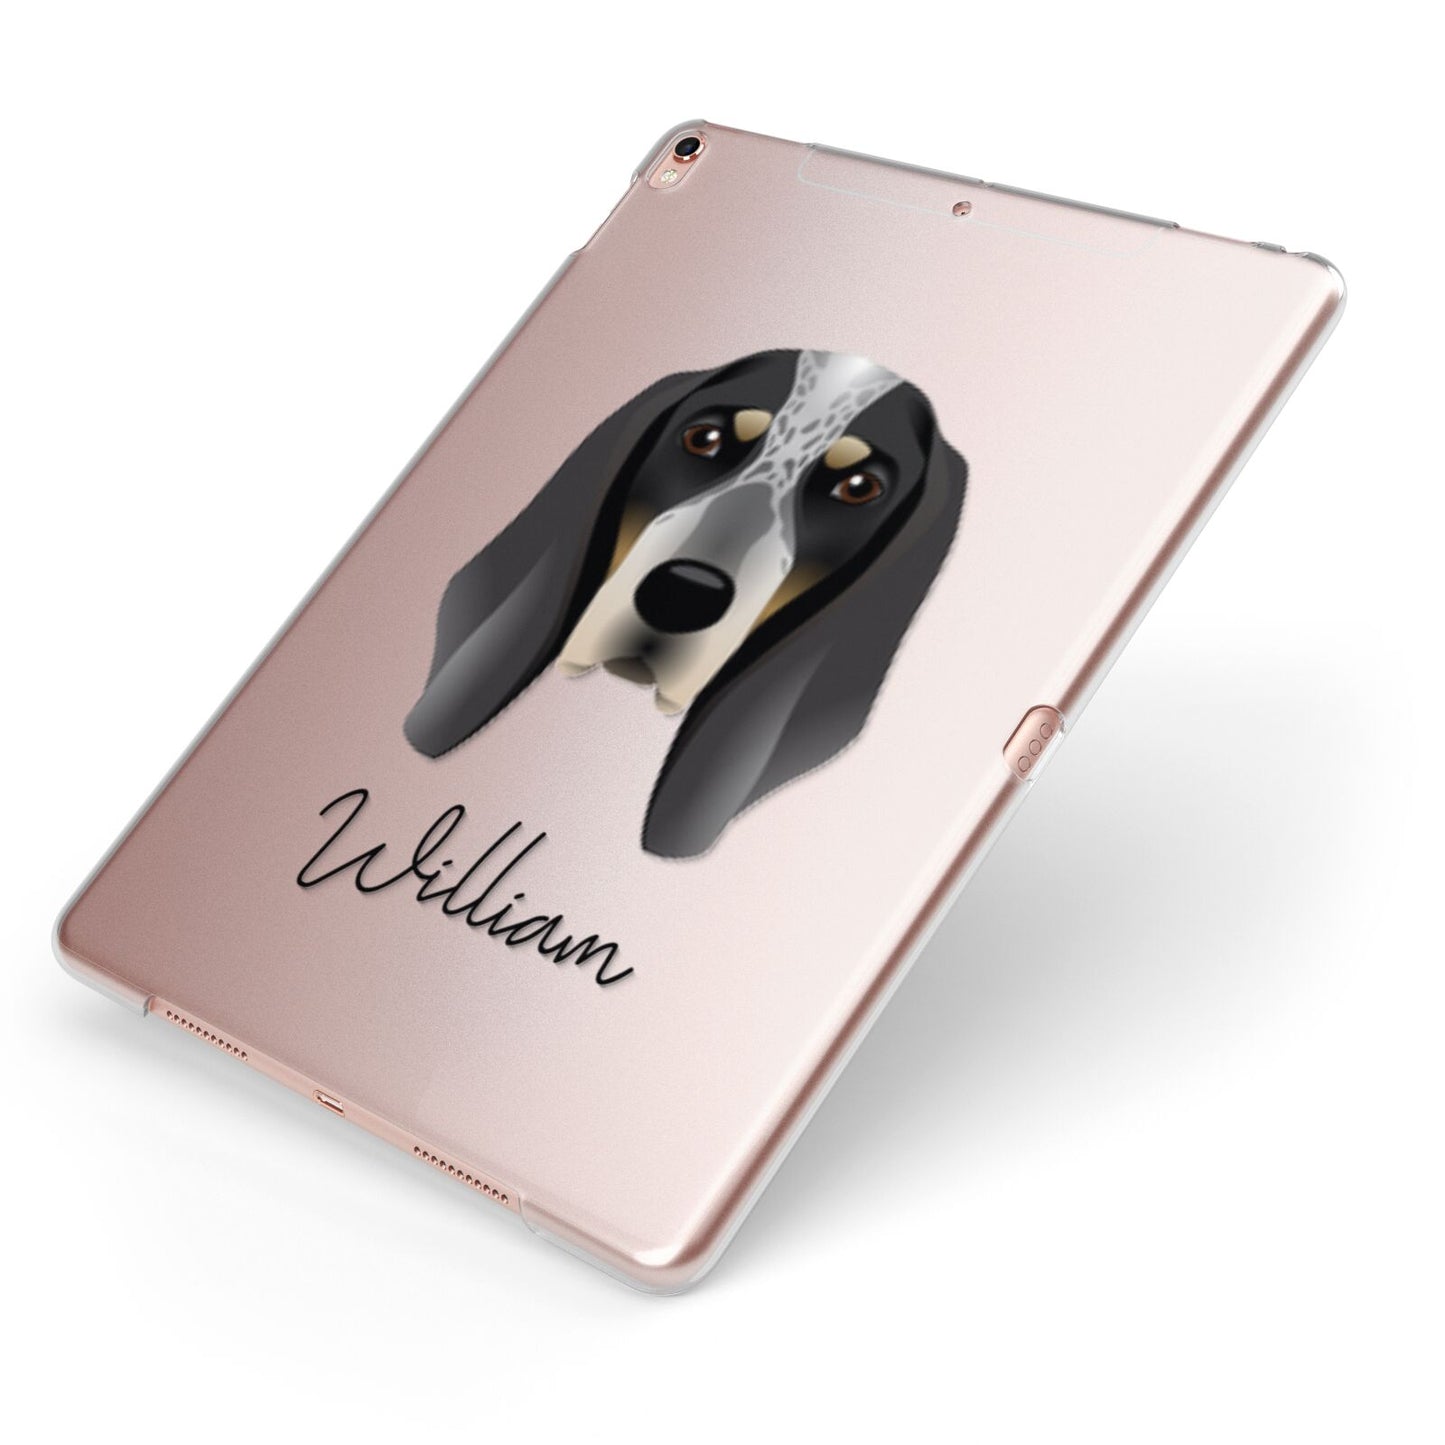 Grand Bleu De Gascogne Personalised Apple iPad Case on Rose Gold iPad Side View